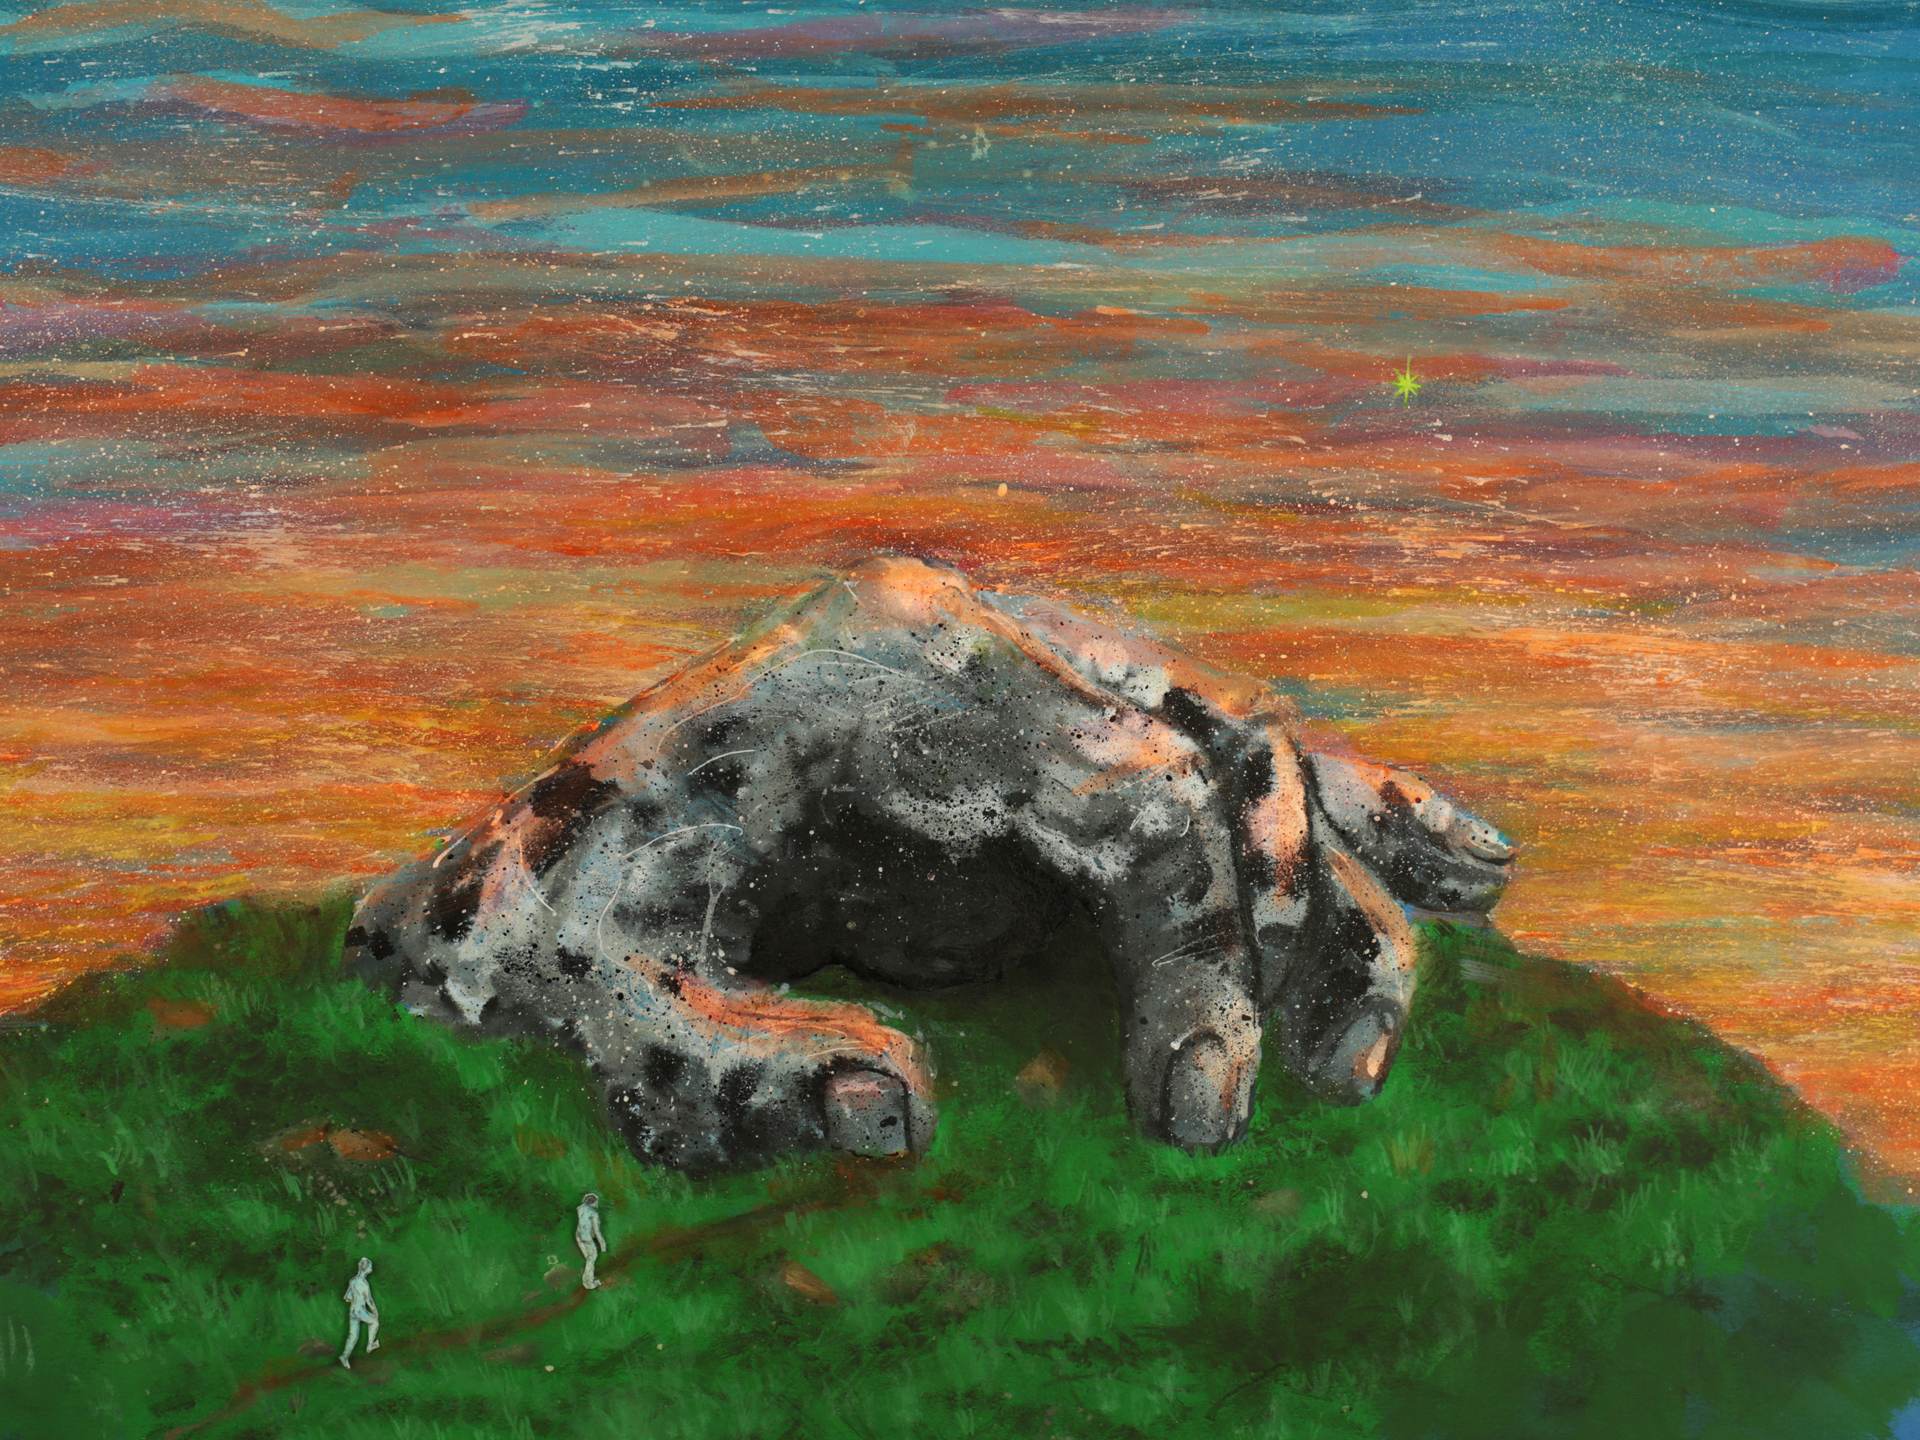 A pastel drawing of a grassy hill summit at sunset. The sky undulates from top to bottom: dark blue, light blue, red, purple, orange and yellow. A yellow star glitters in the distance. In the foreground, the stony summit of the hill seems to form into the shape of a half-clenched human fist, with a darkened cave opening appearing in the centre of the rock. Two tiny human figures appear to approach the hilltop, walking in the direction of the cave opening.